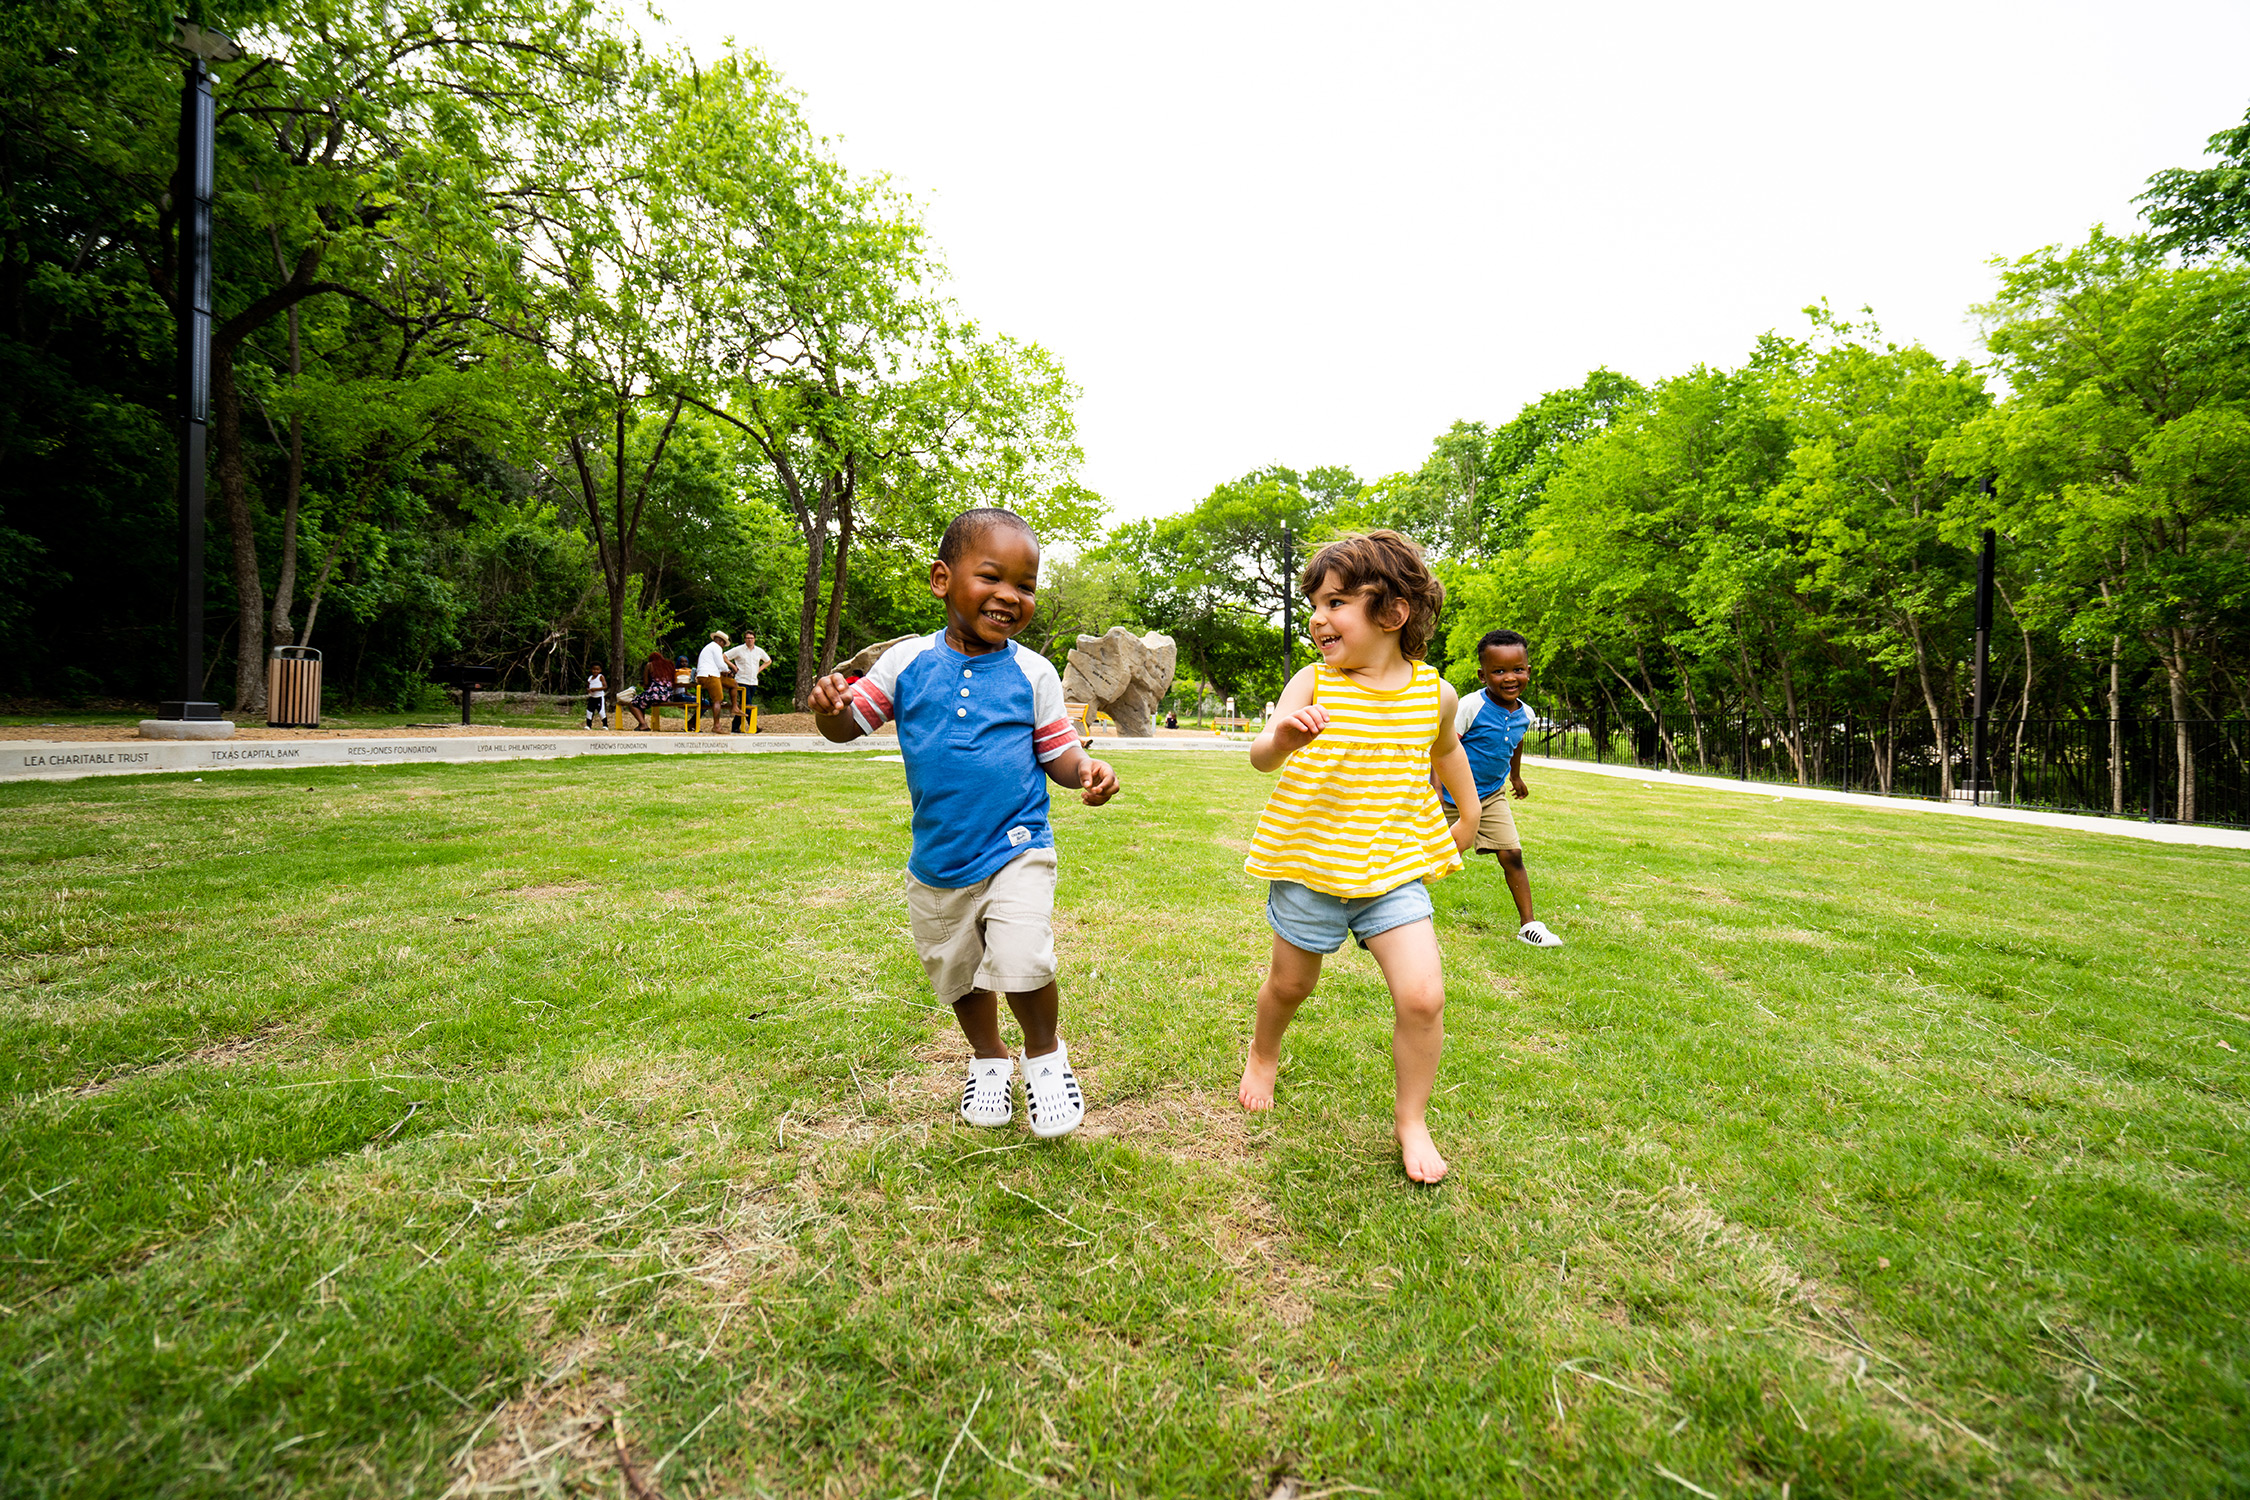 A young boy and girl run across a grassy lawn at a small park edged with trees.